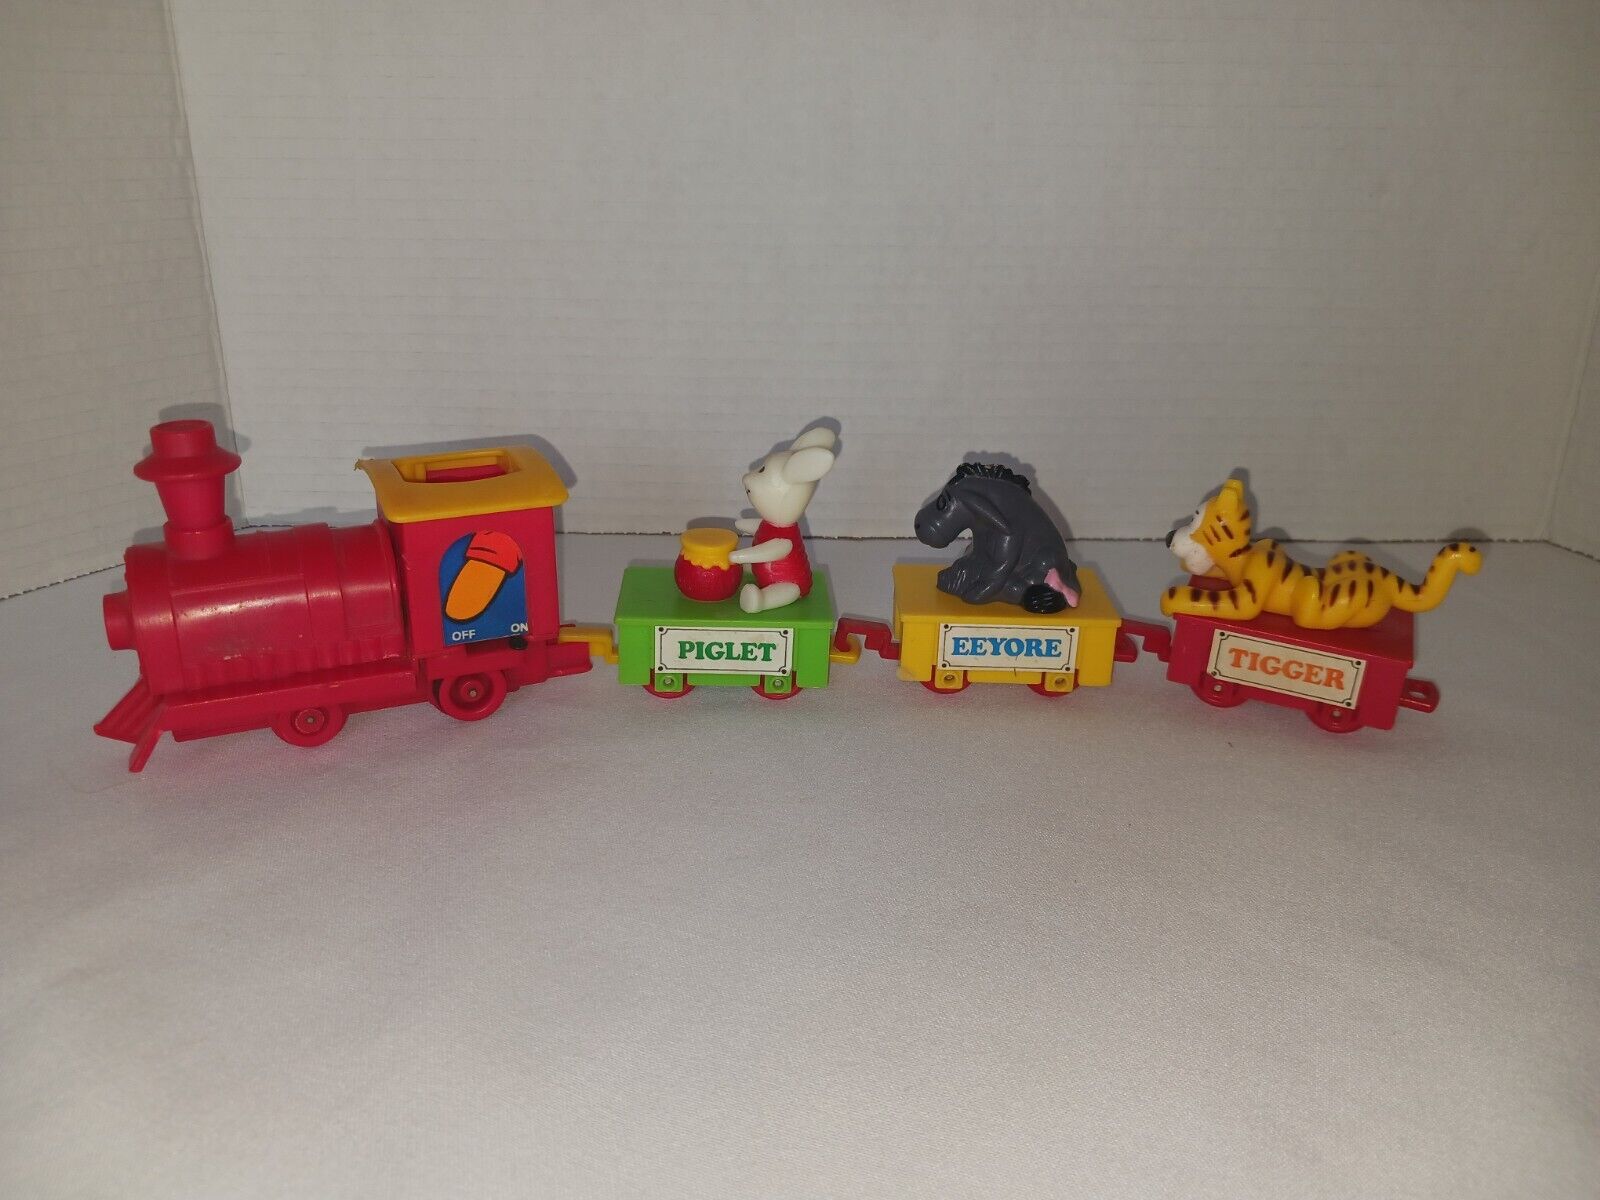 Vintage 1982 Sears Winnie The Pooh Express Piglet, Tigger, and Eeyore Train Cars